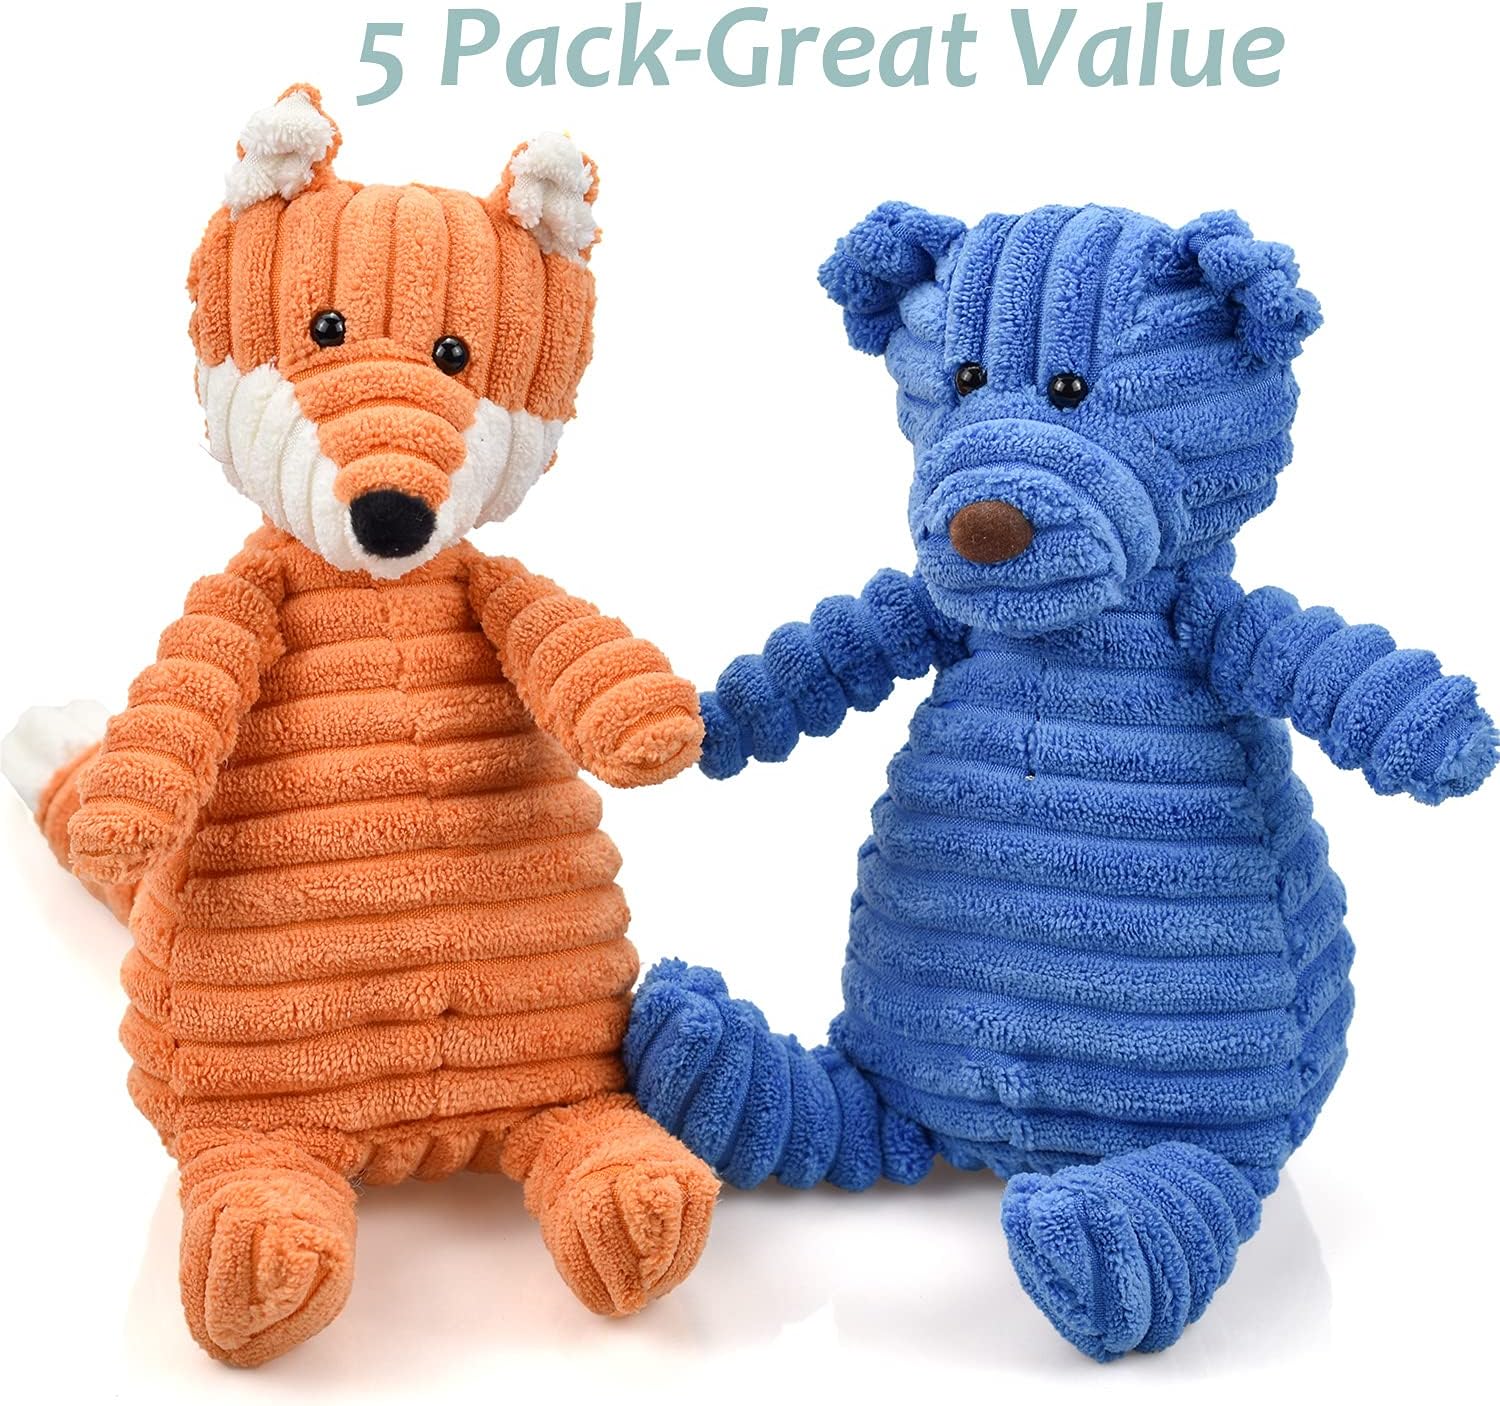 5Pack Dog Squeaky Plush Toys Puppy Toys Assortment Value Bundle Dog Toy for Puppies Bulk Large Dog Teething Toys Pet Chew Toys